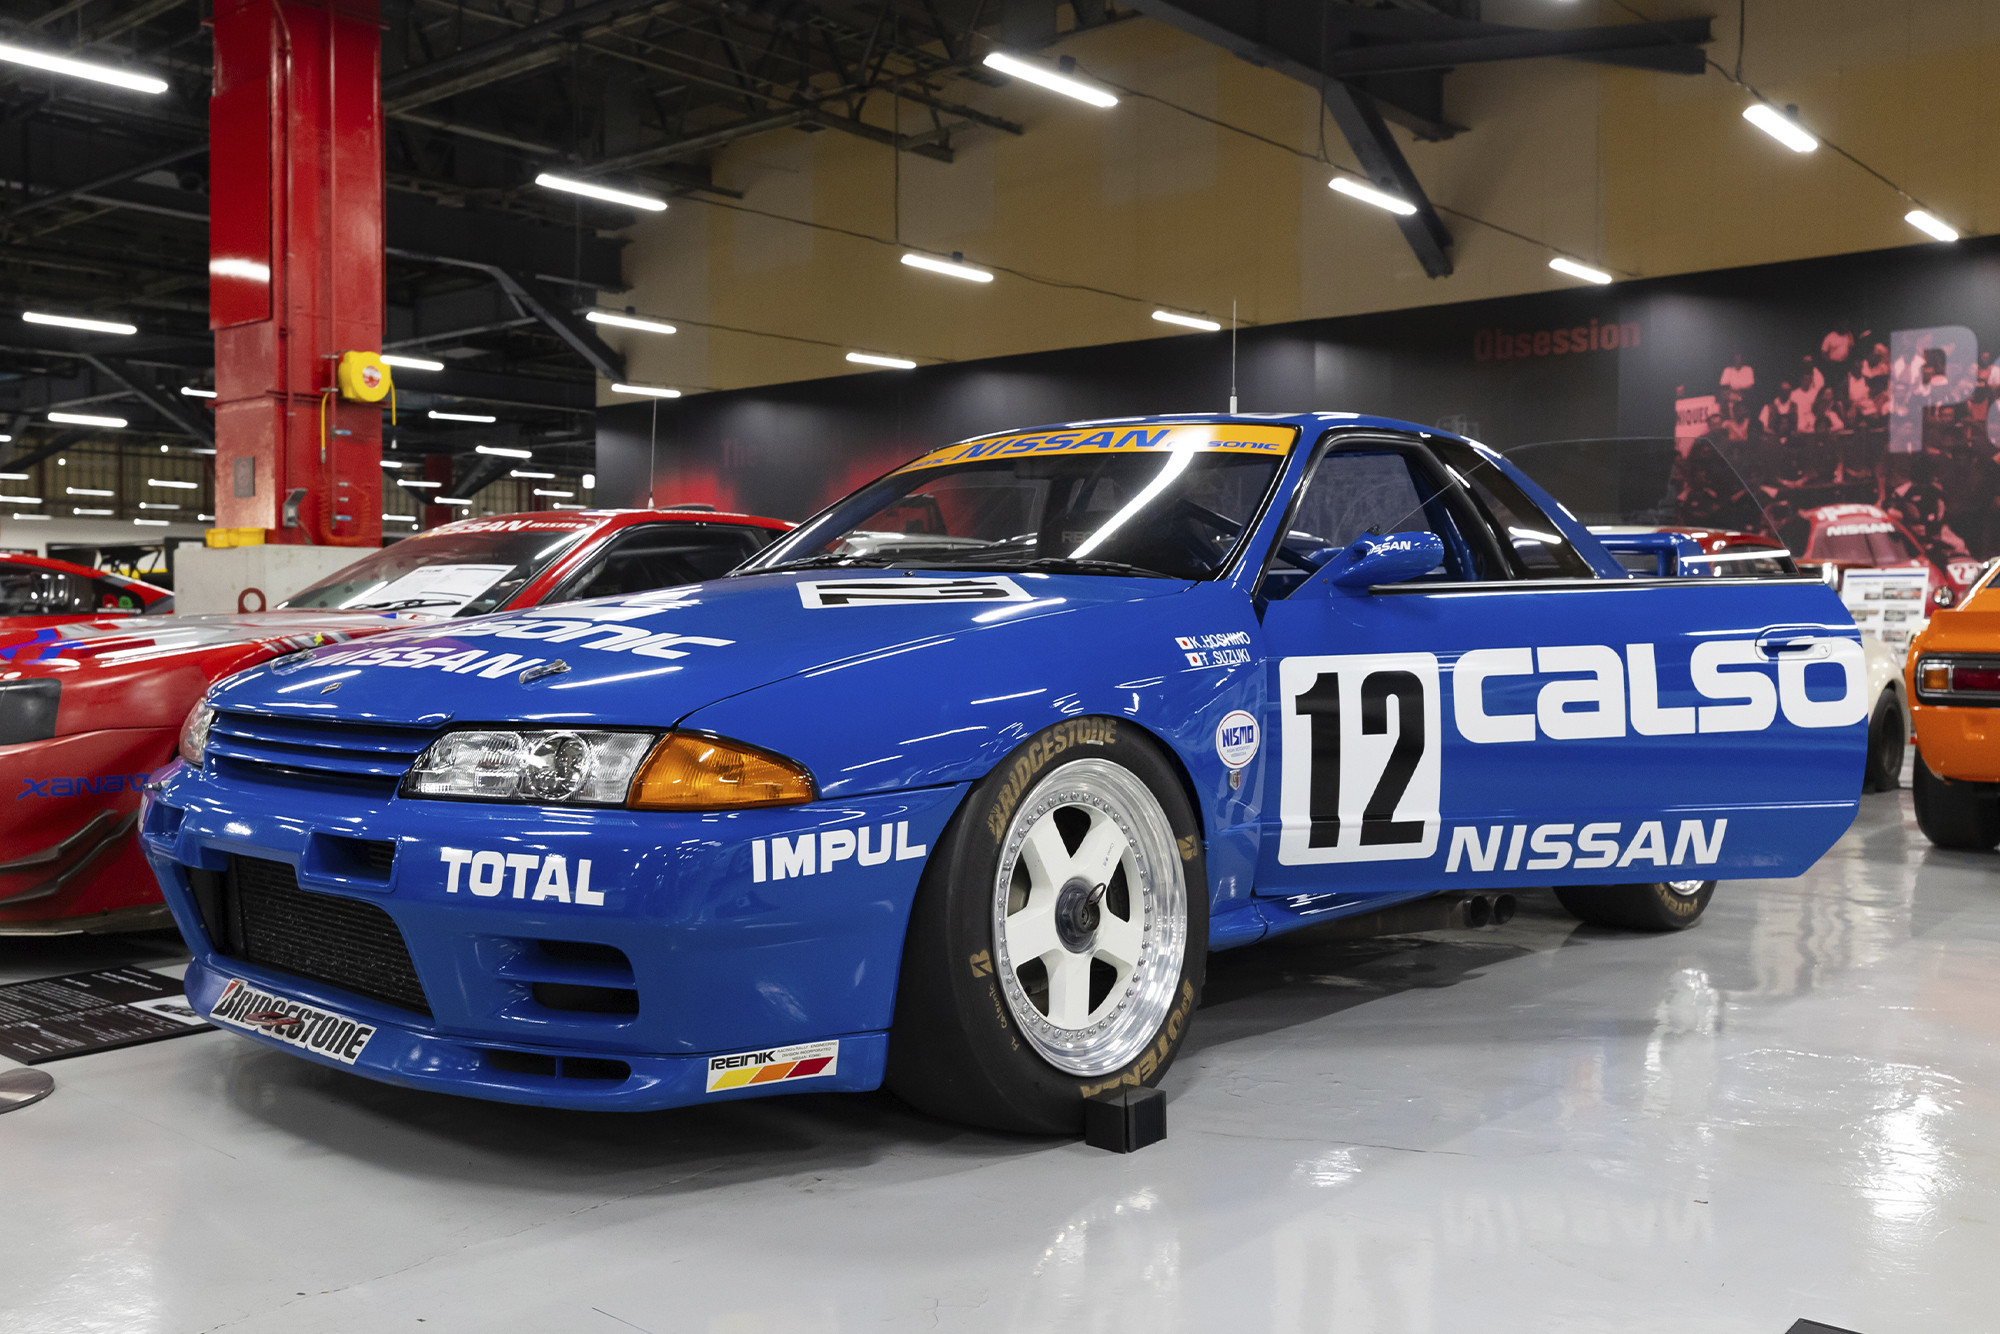 This is “Godzilla,” the car that gave today’s Nissan GT-R its nickname. This Skyline GT-R R32 Calsonic went undefeated, winning 29 races from 29 starts in the early ‘90s. Perhaps the most famous racecar in Japan.